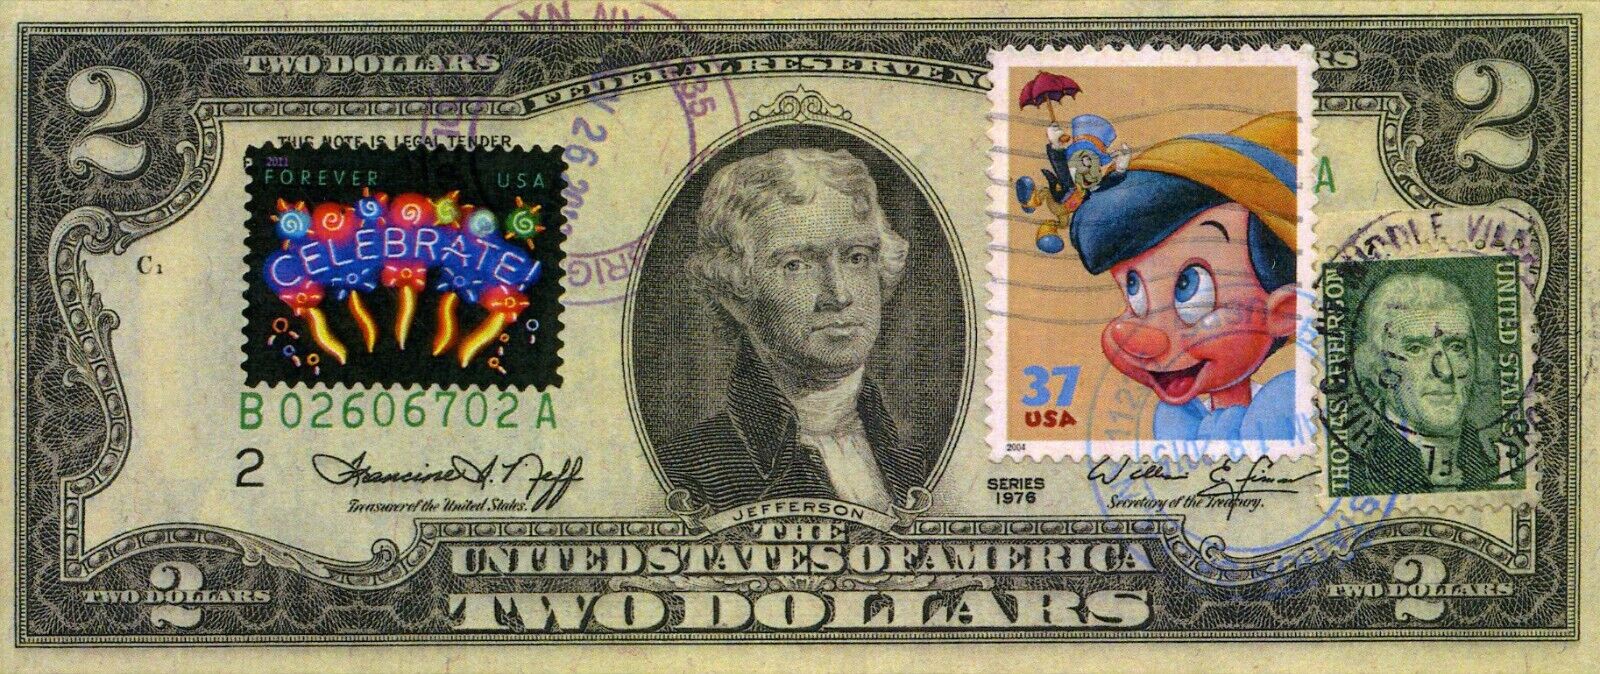 MAGNET MASCOT $2 1976 POST STAMP CANCELED THE OCCASION OF DISNEY VALUE $9.95